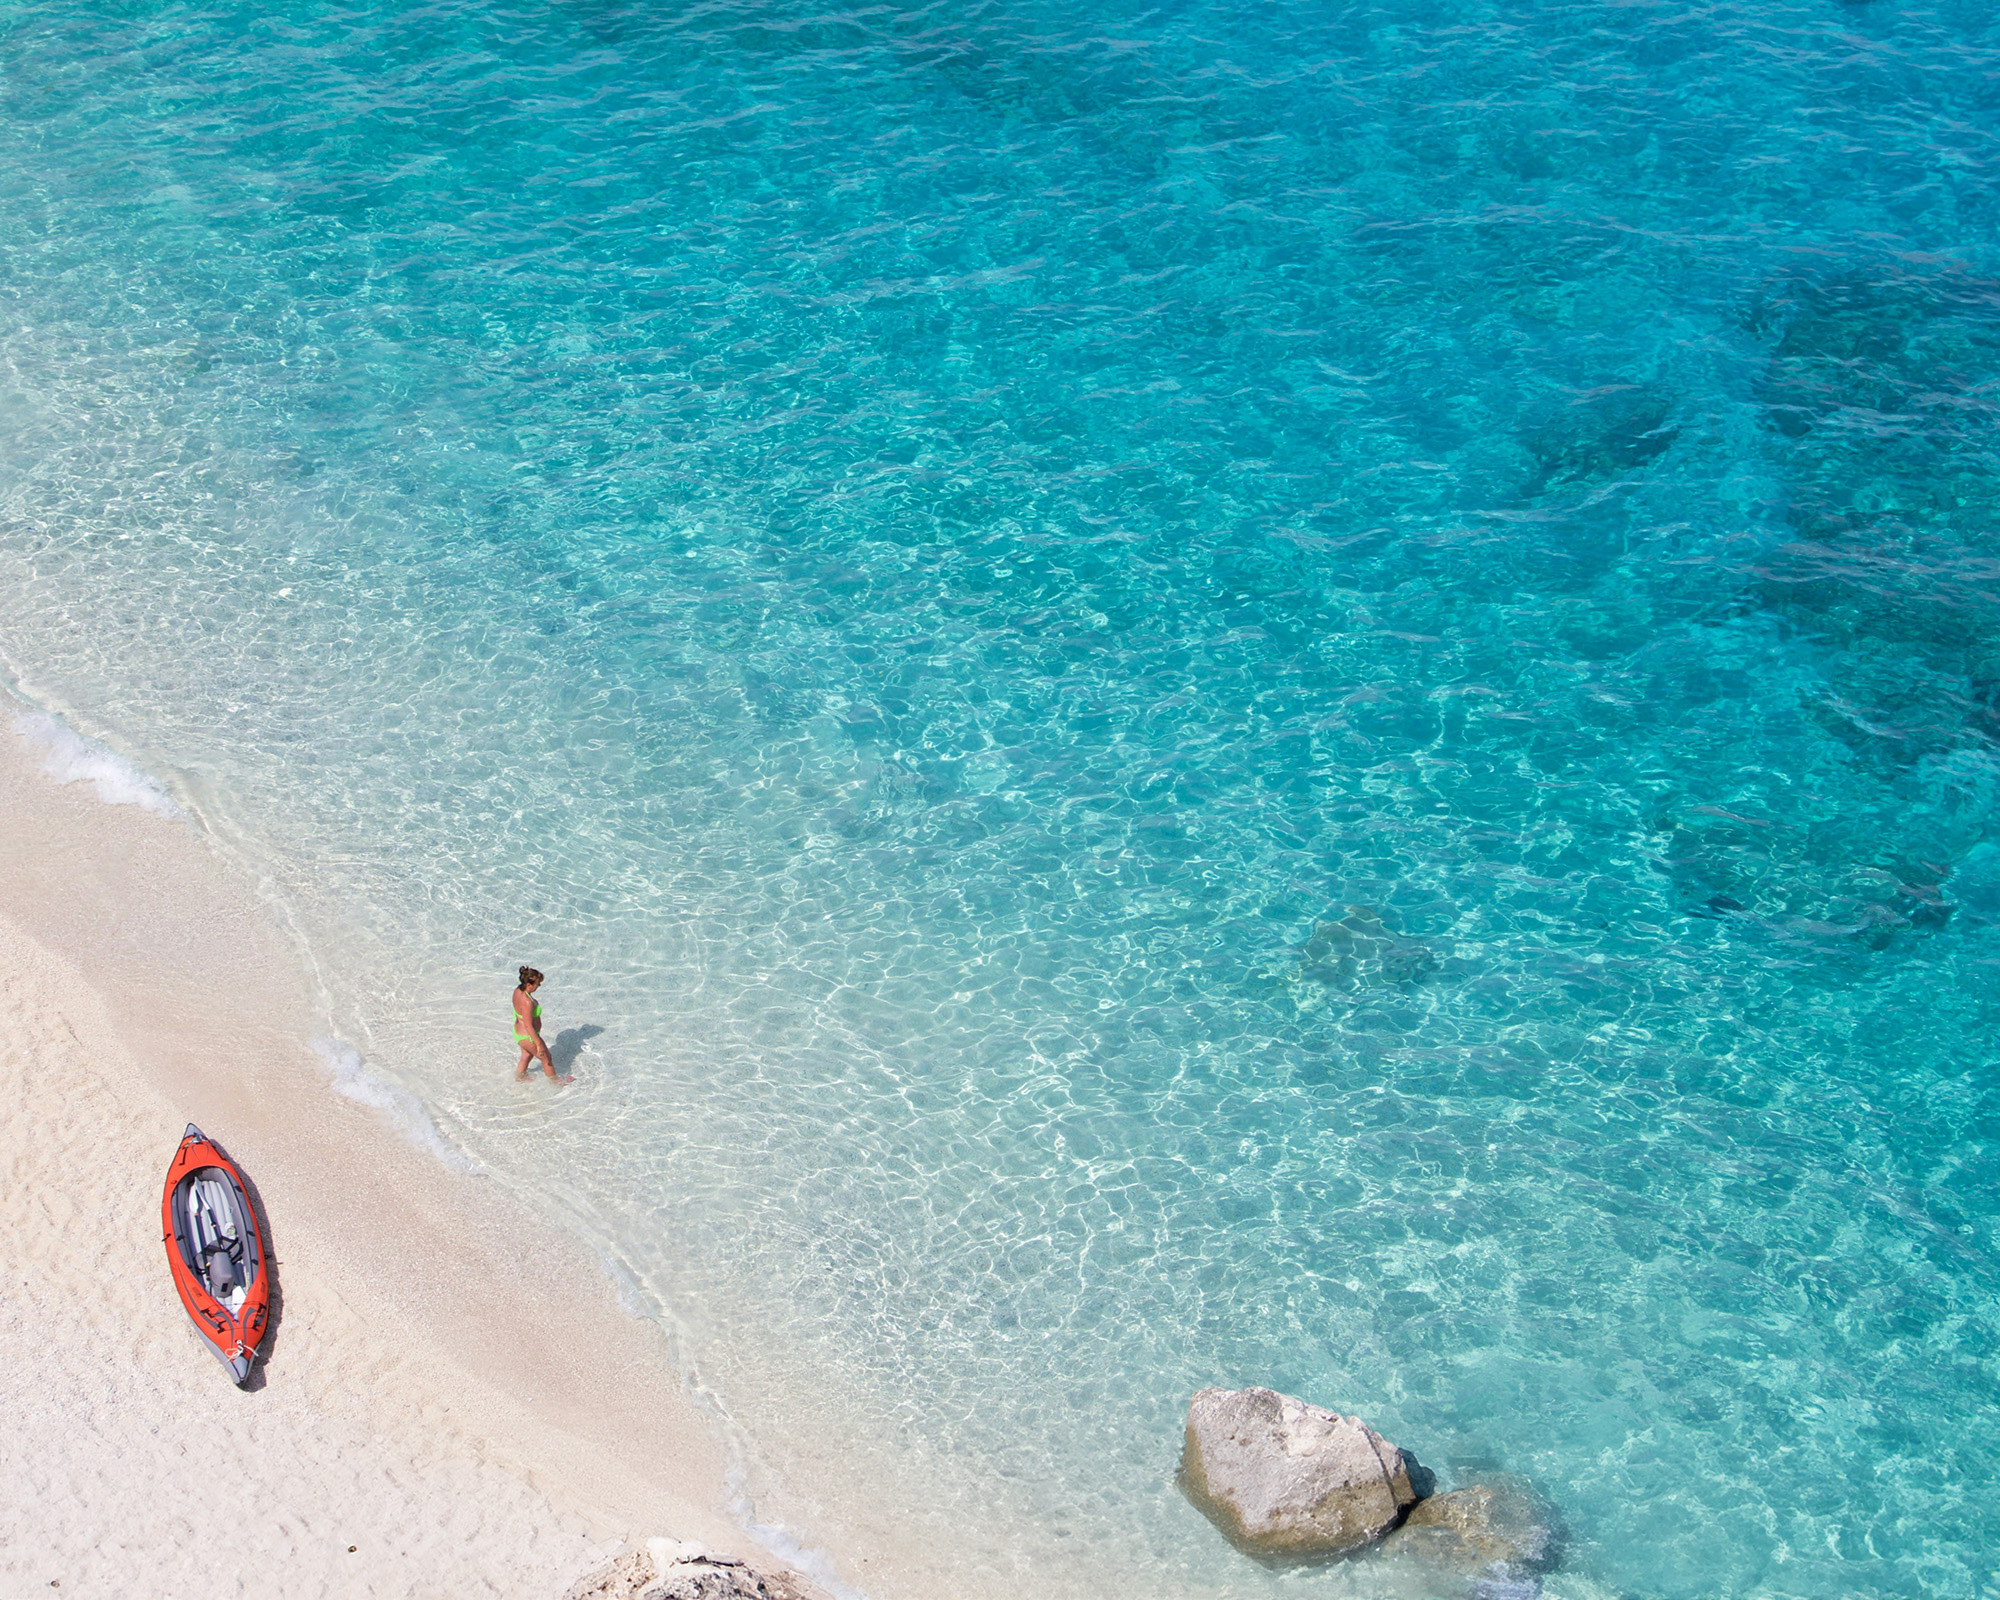 Cala Macarelleta is a small, secluded beach with powdery white sand and clear turquoise waters